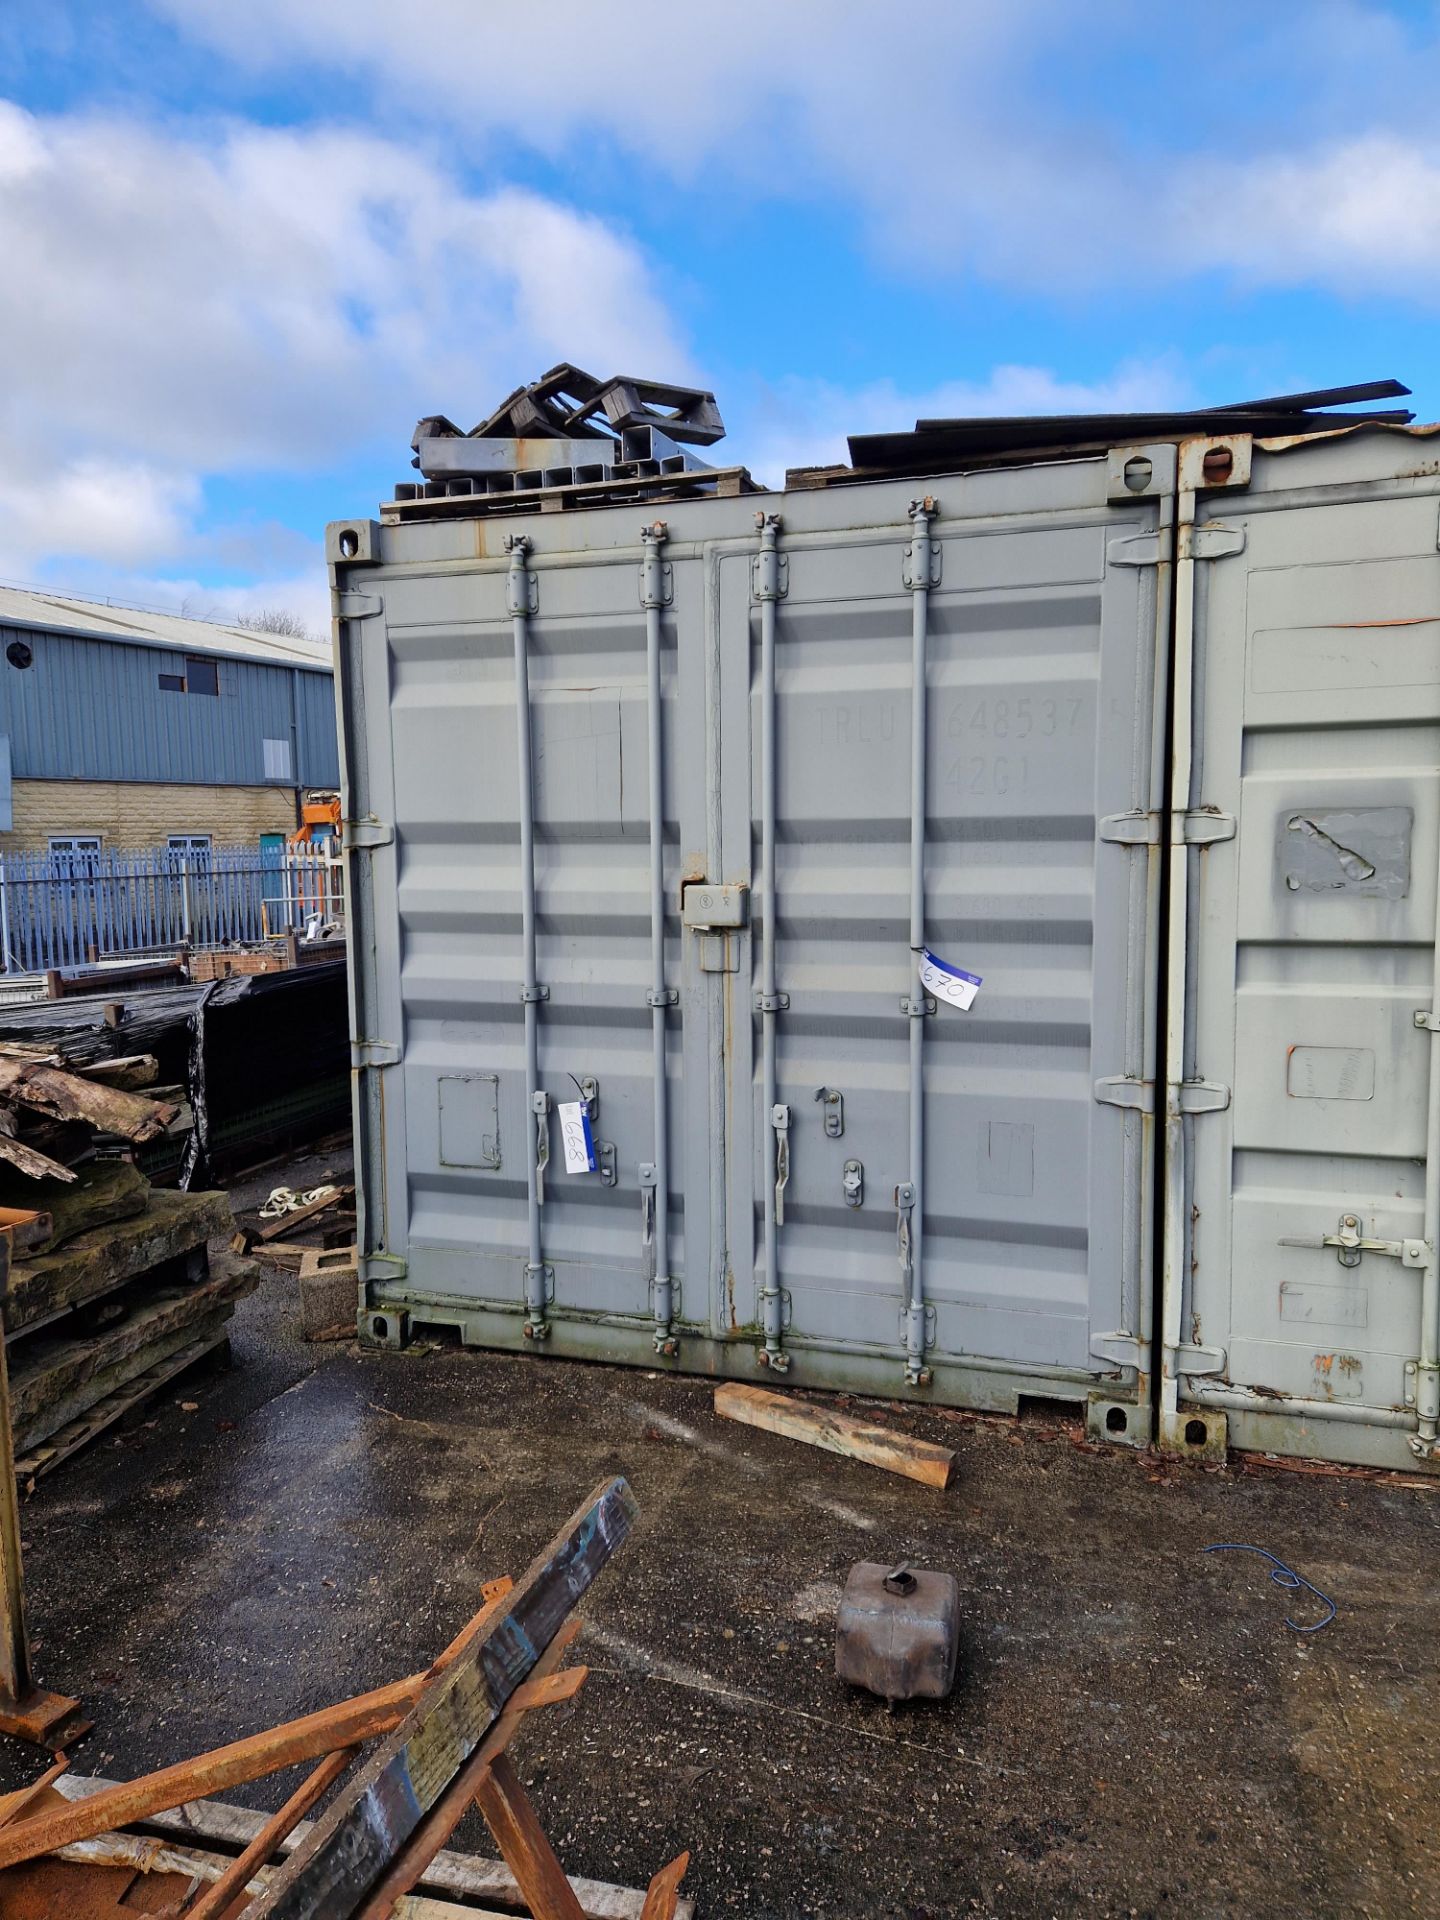 40ft Steel Container (Reserve Removal until contents cleared). This lot requires risk assessment &